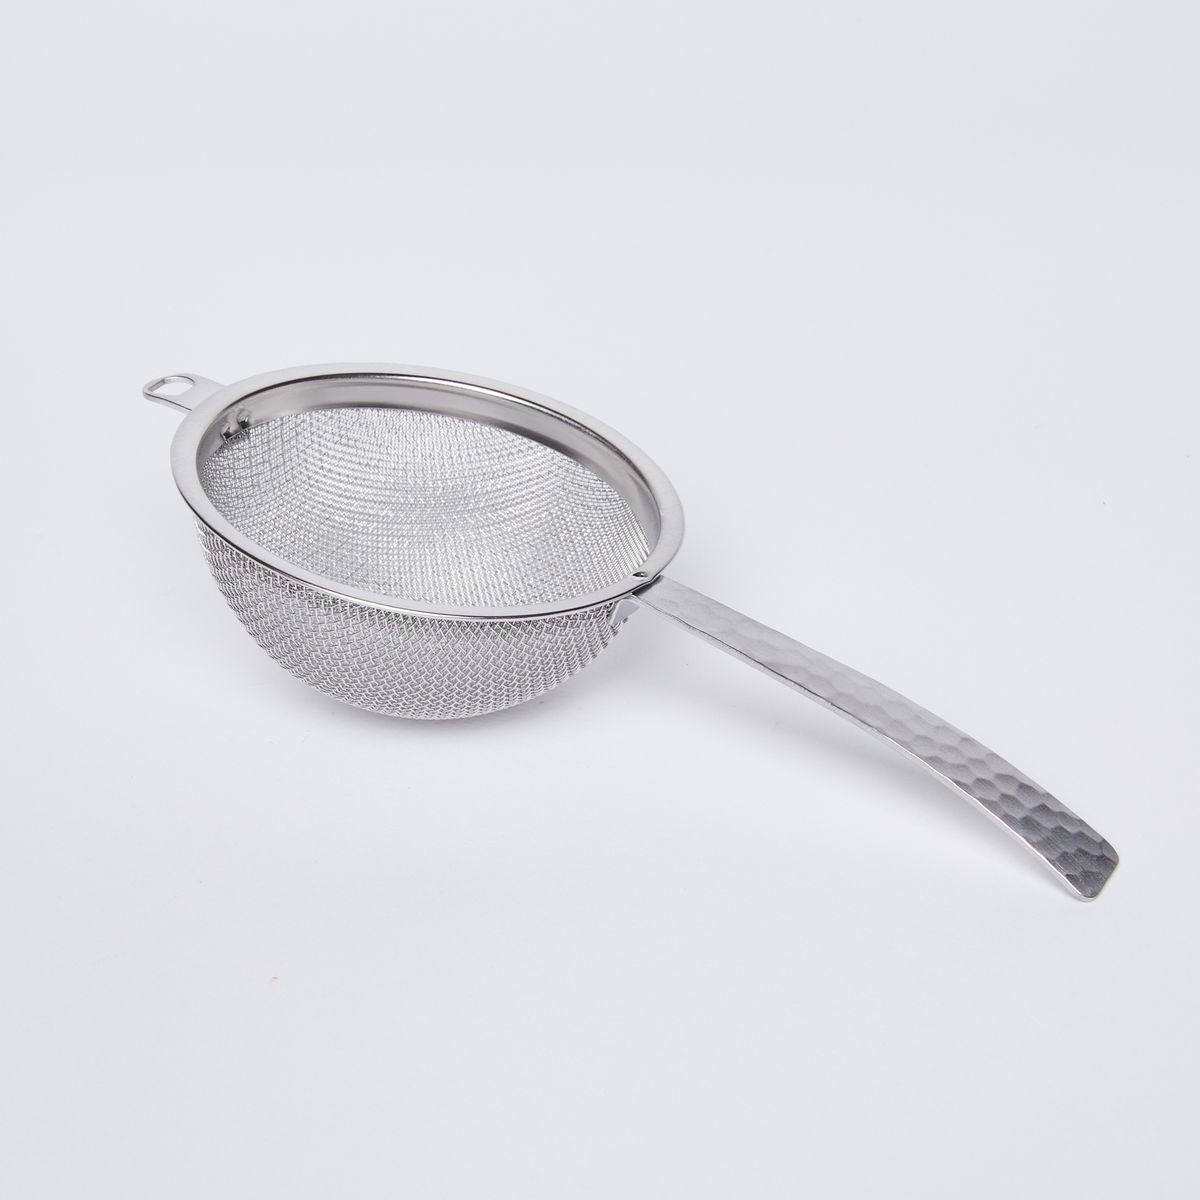 Stainless steel half dome strainer with steel handle